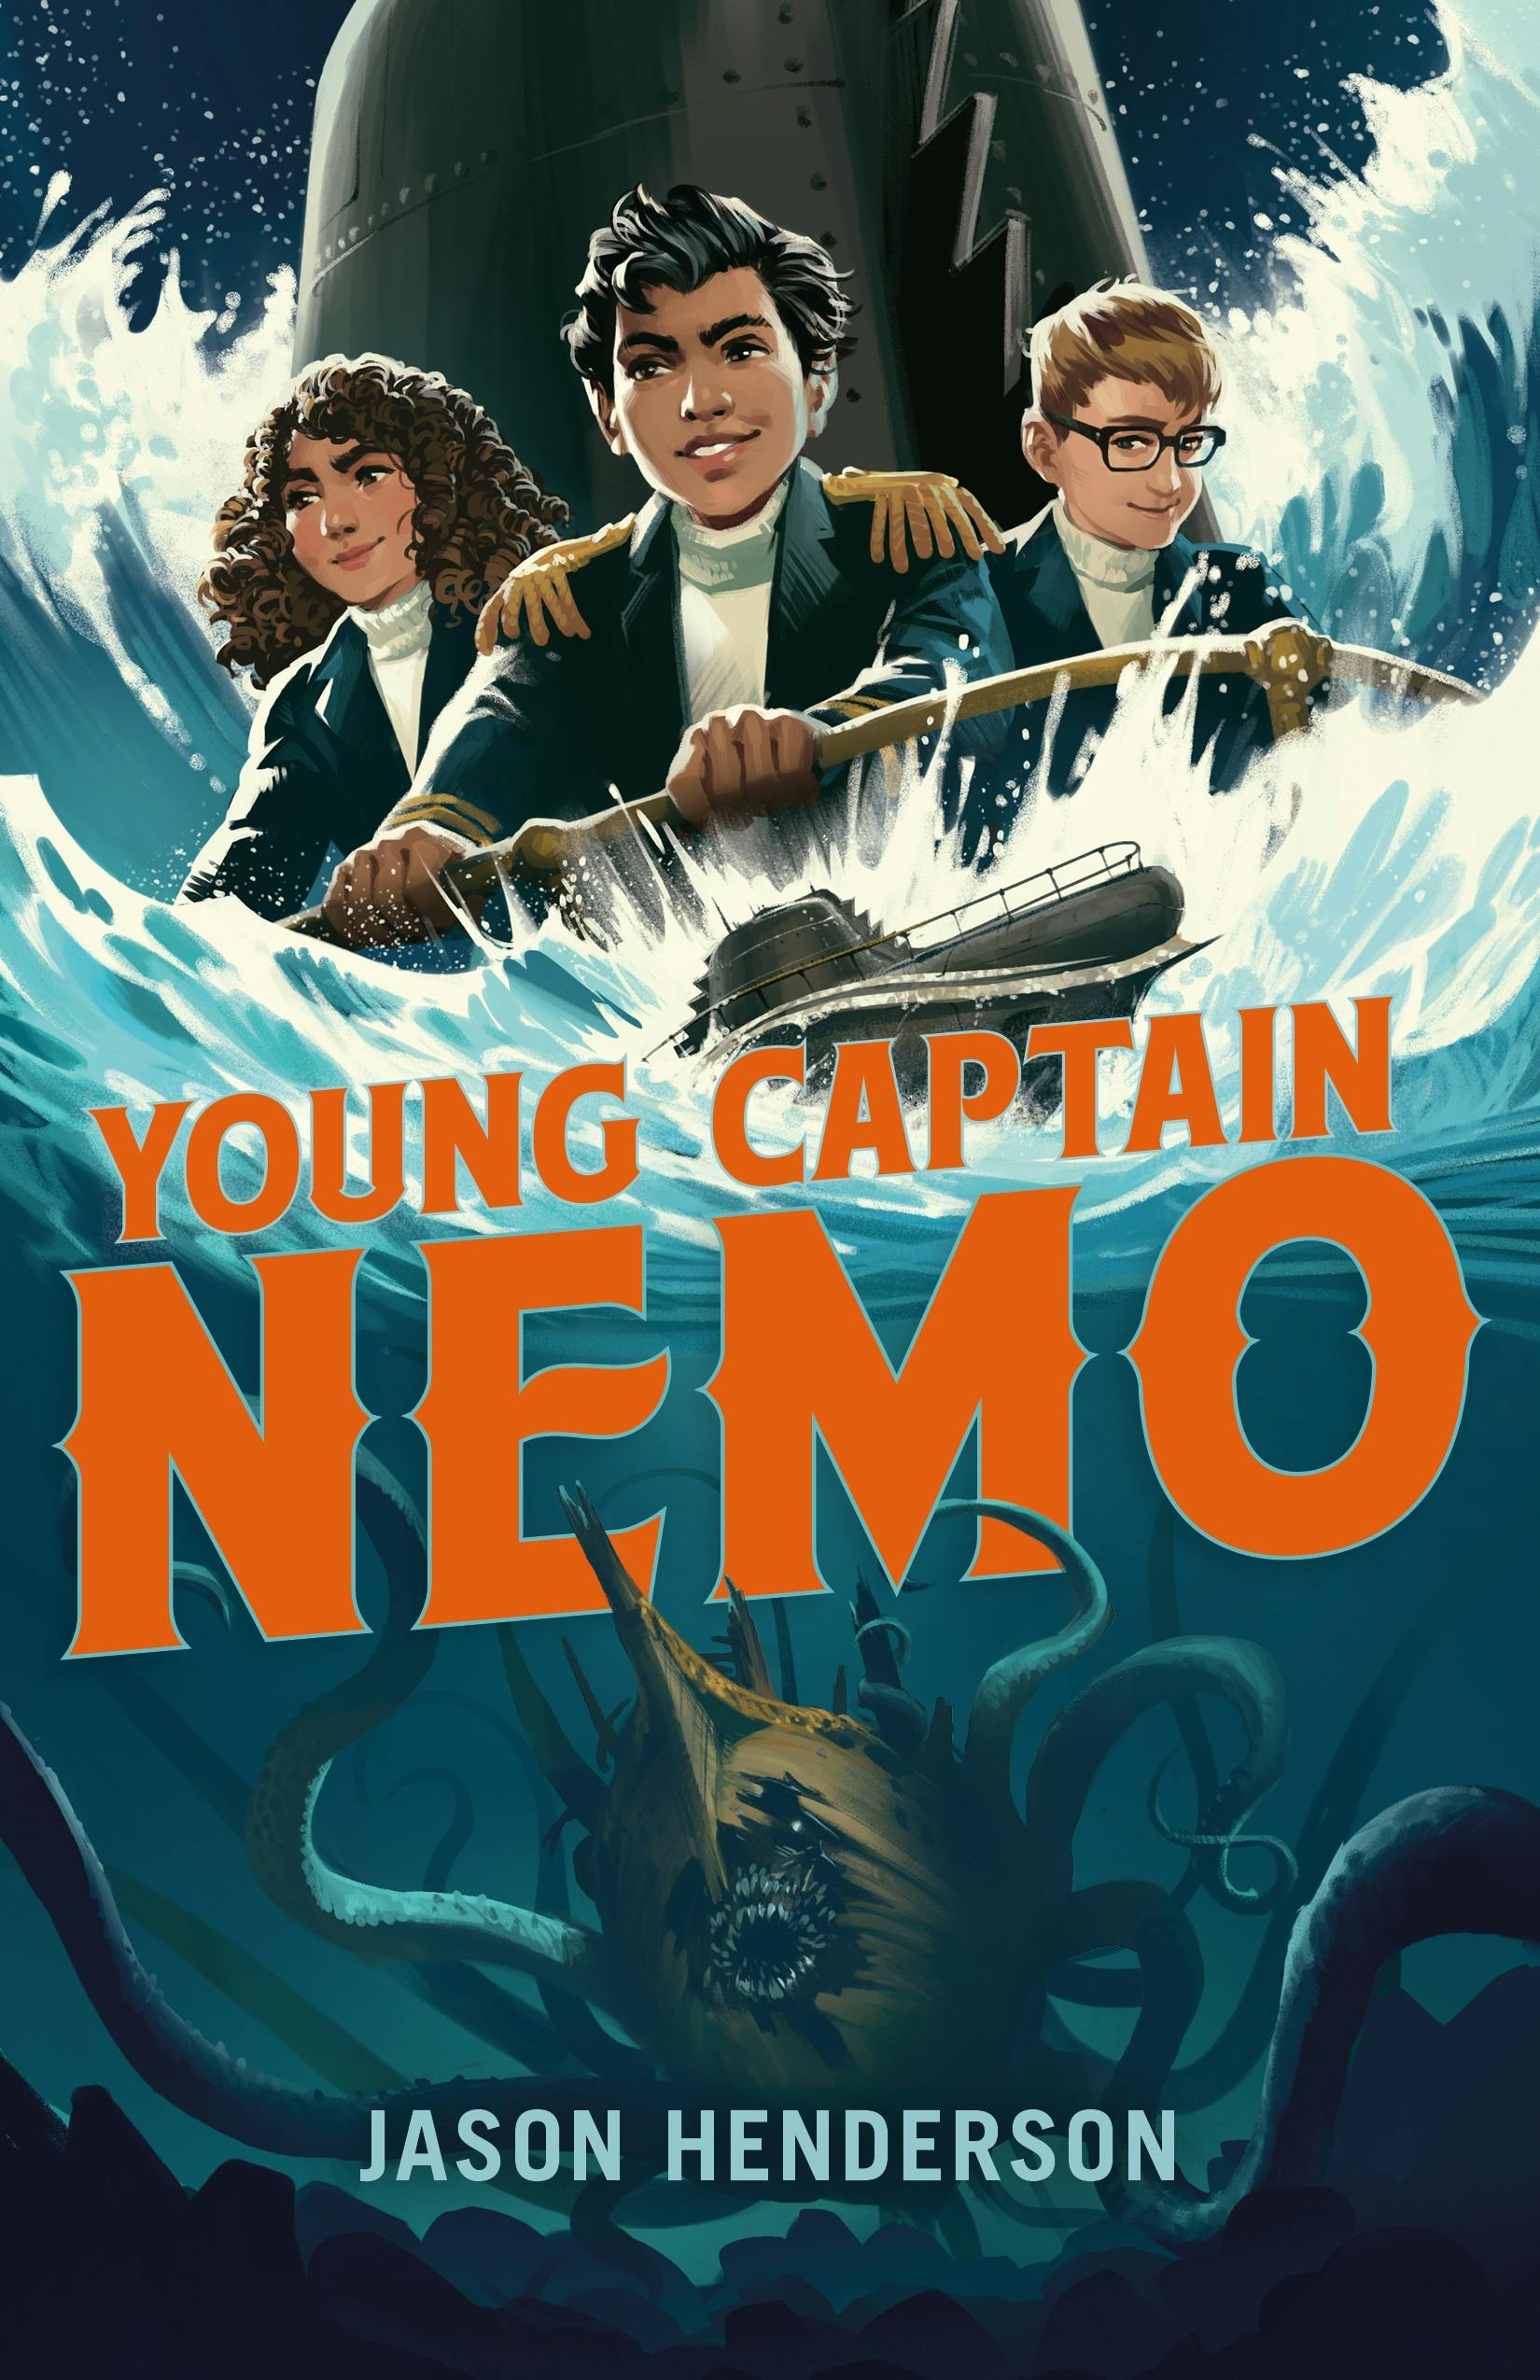 Image of Young Captain Nemo